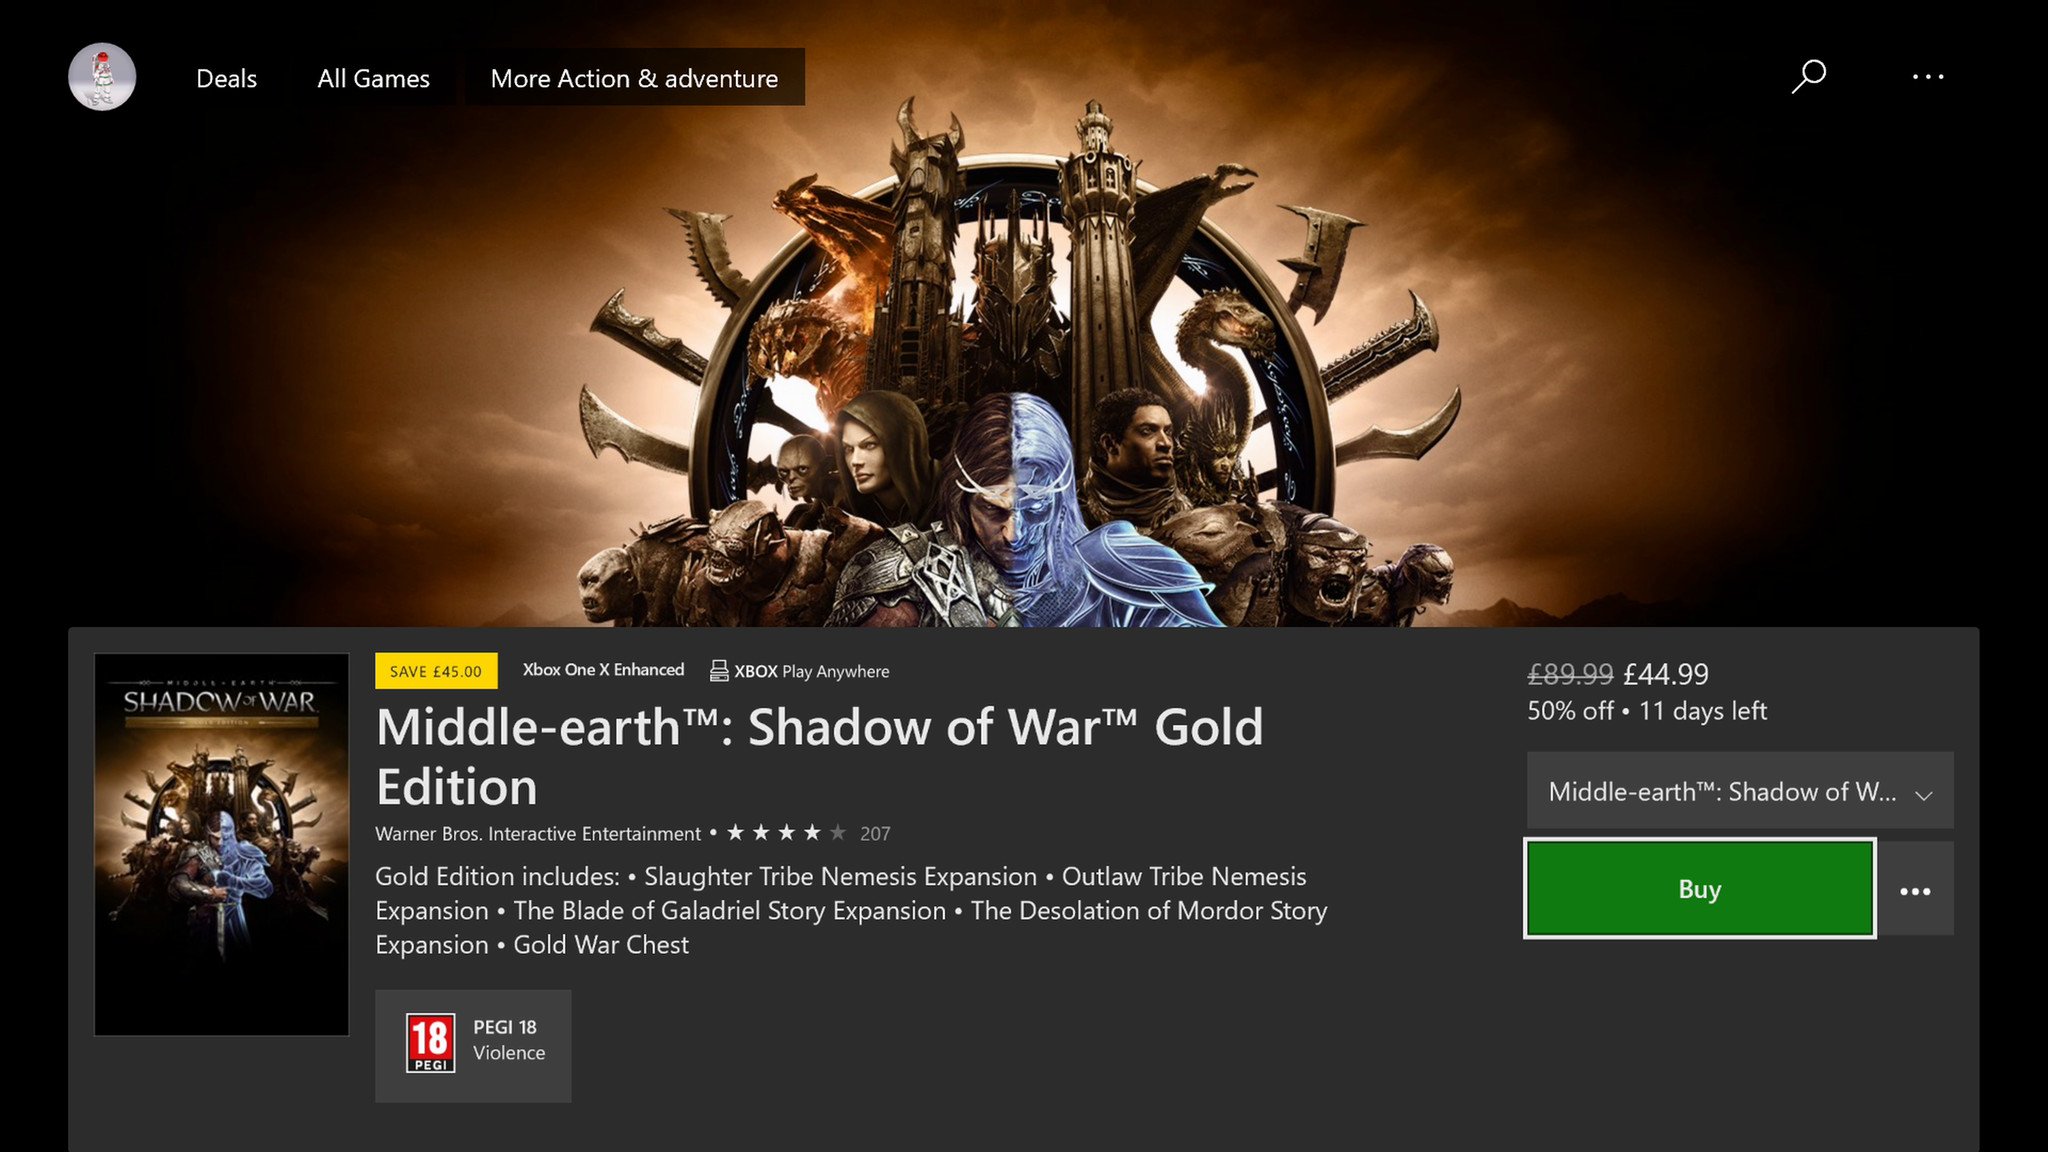 xbox 1 game store